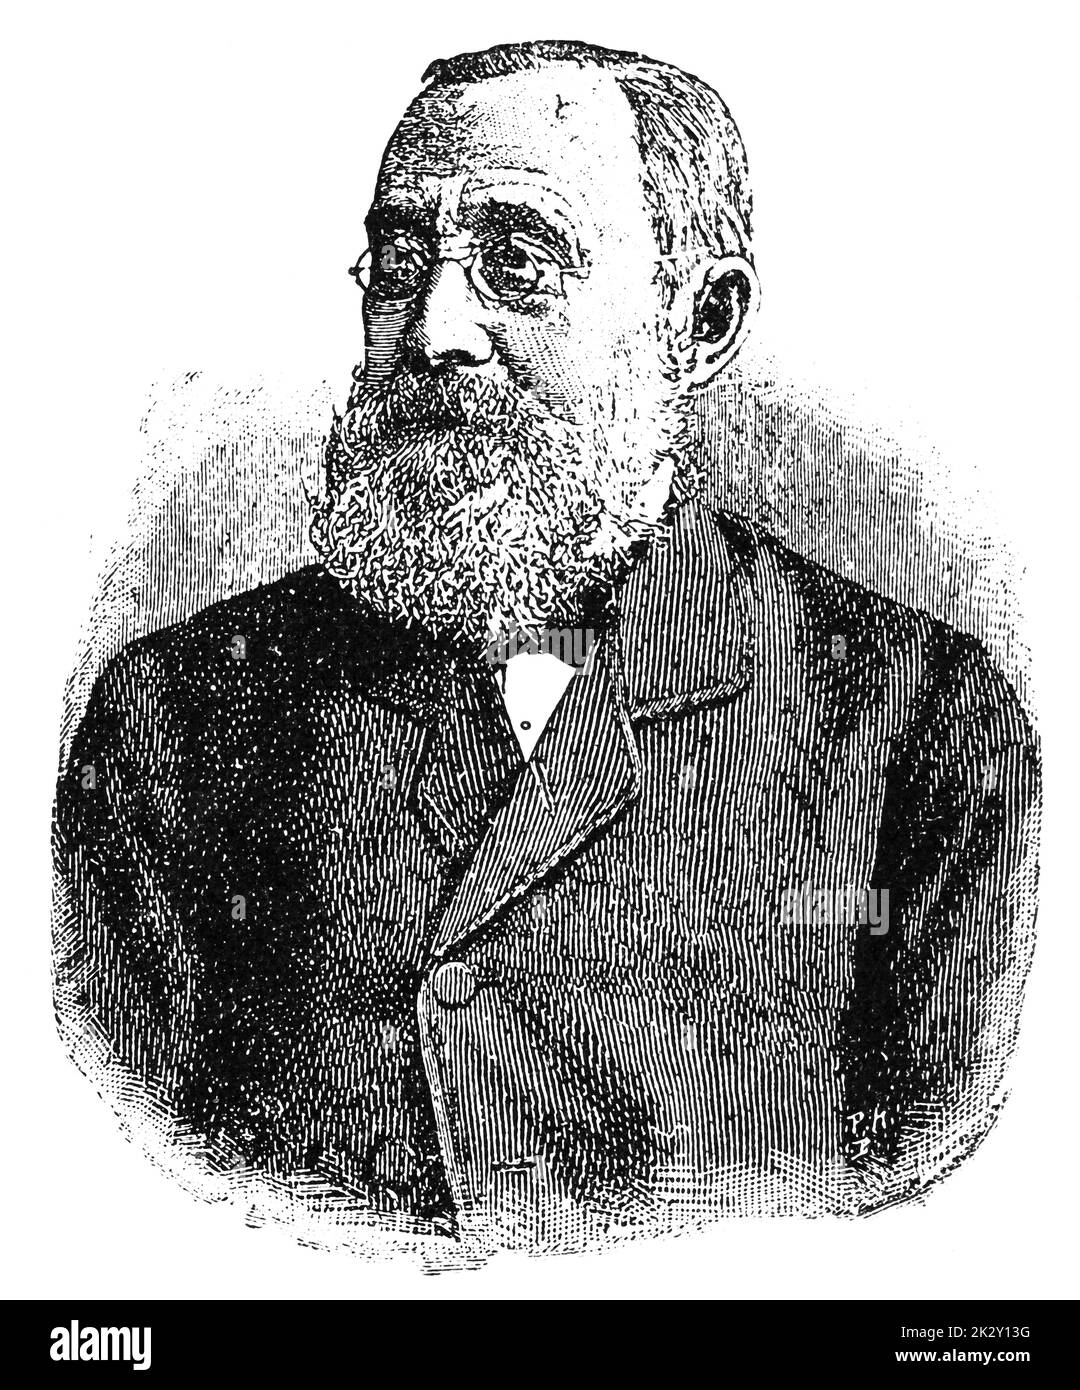 Portrait of Rudolf Ludwig Carl Virchow - a German physician, anthropologist, pathologist, prehistorian, biologist, writer, editor, and politician. Illustration of the 19th century. White background. Stock Photo